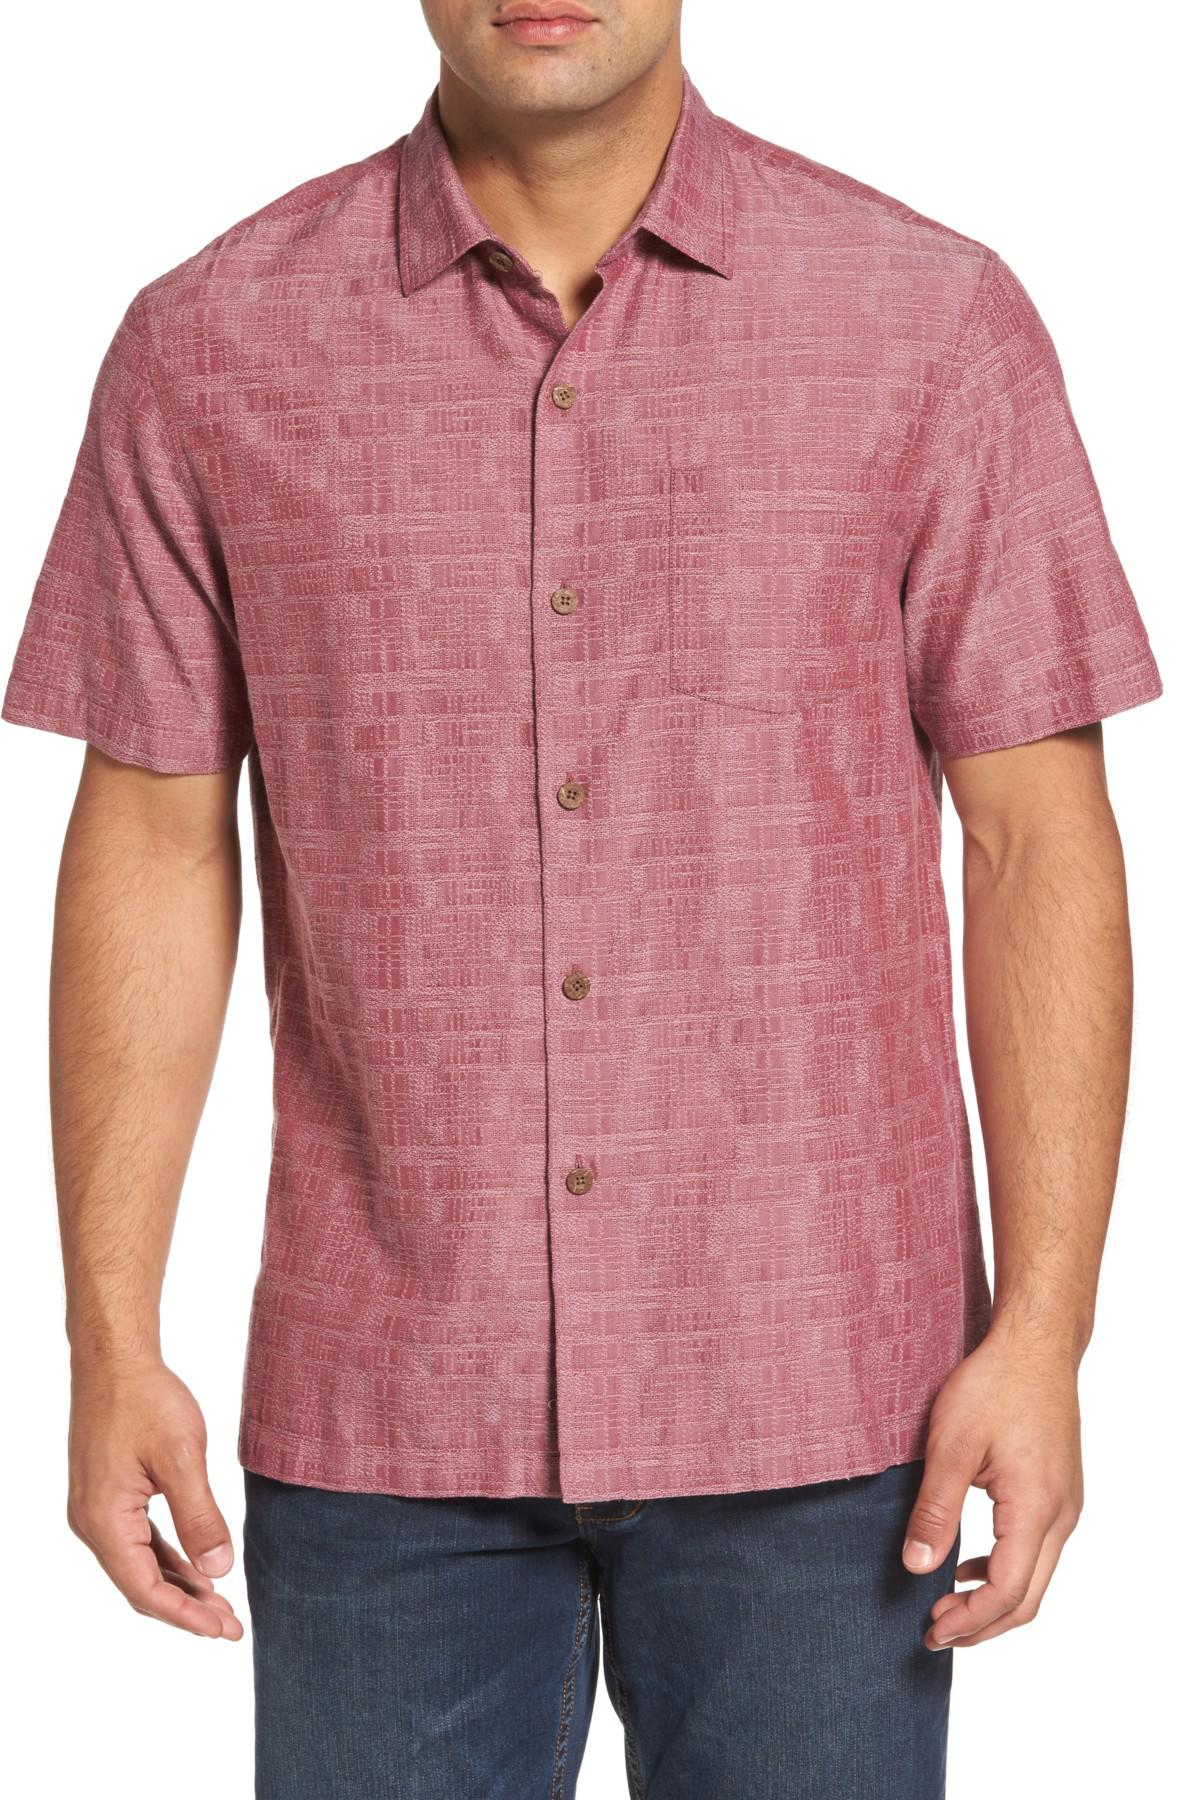 Lyst - Tommy Bahama Oceanside Woven Shirt in Pink for Men - Save 21%